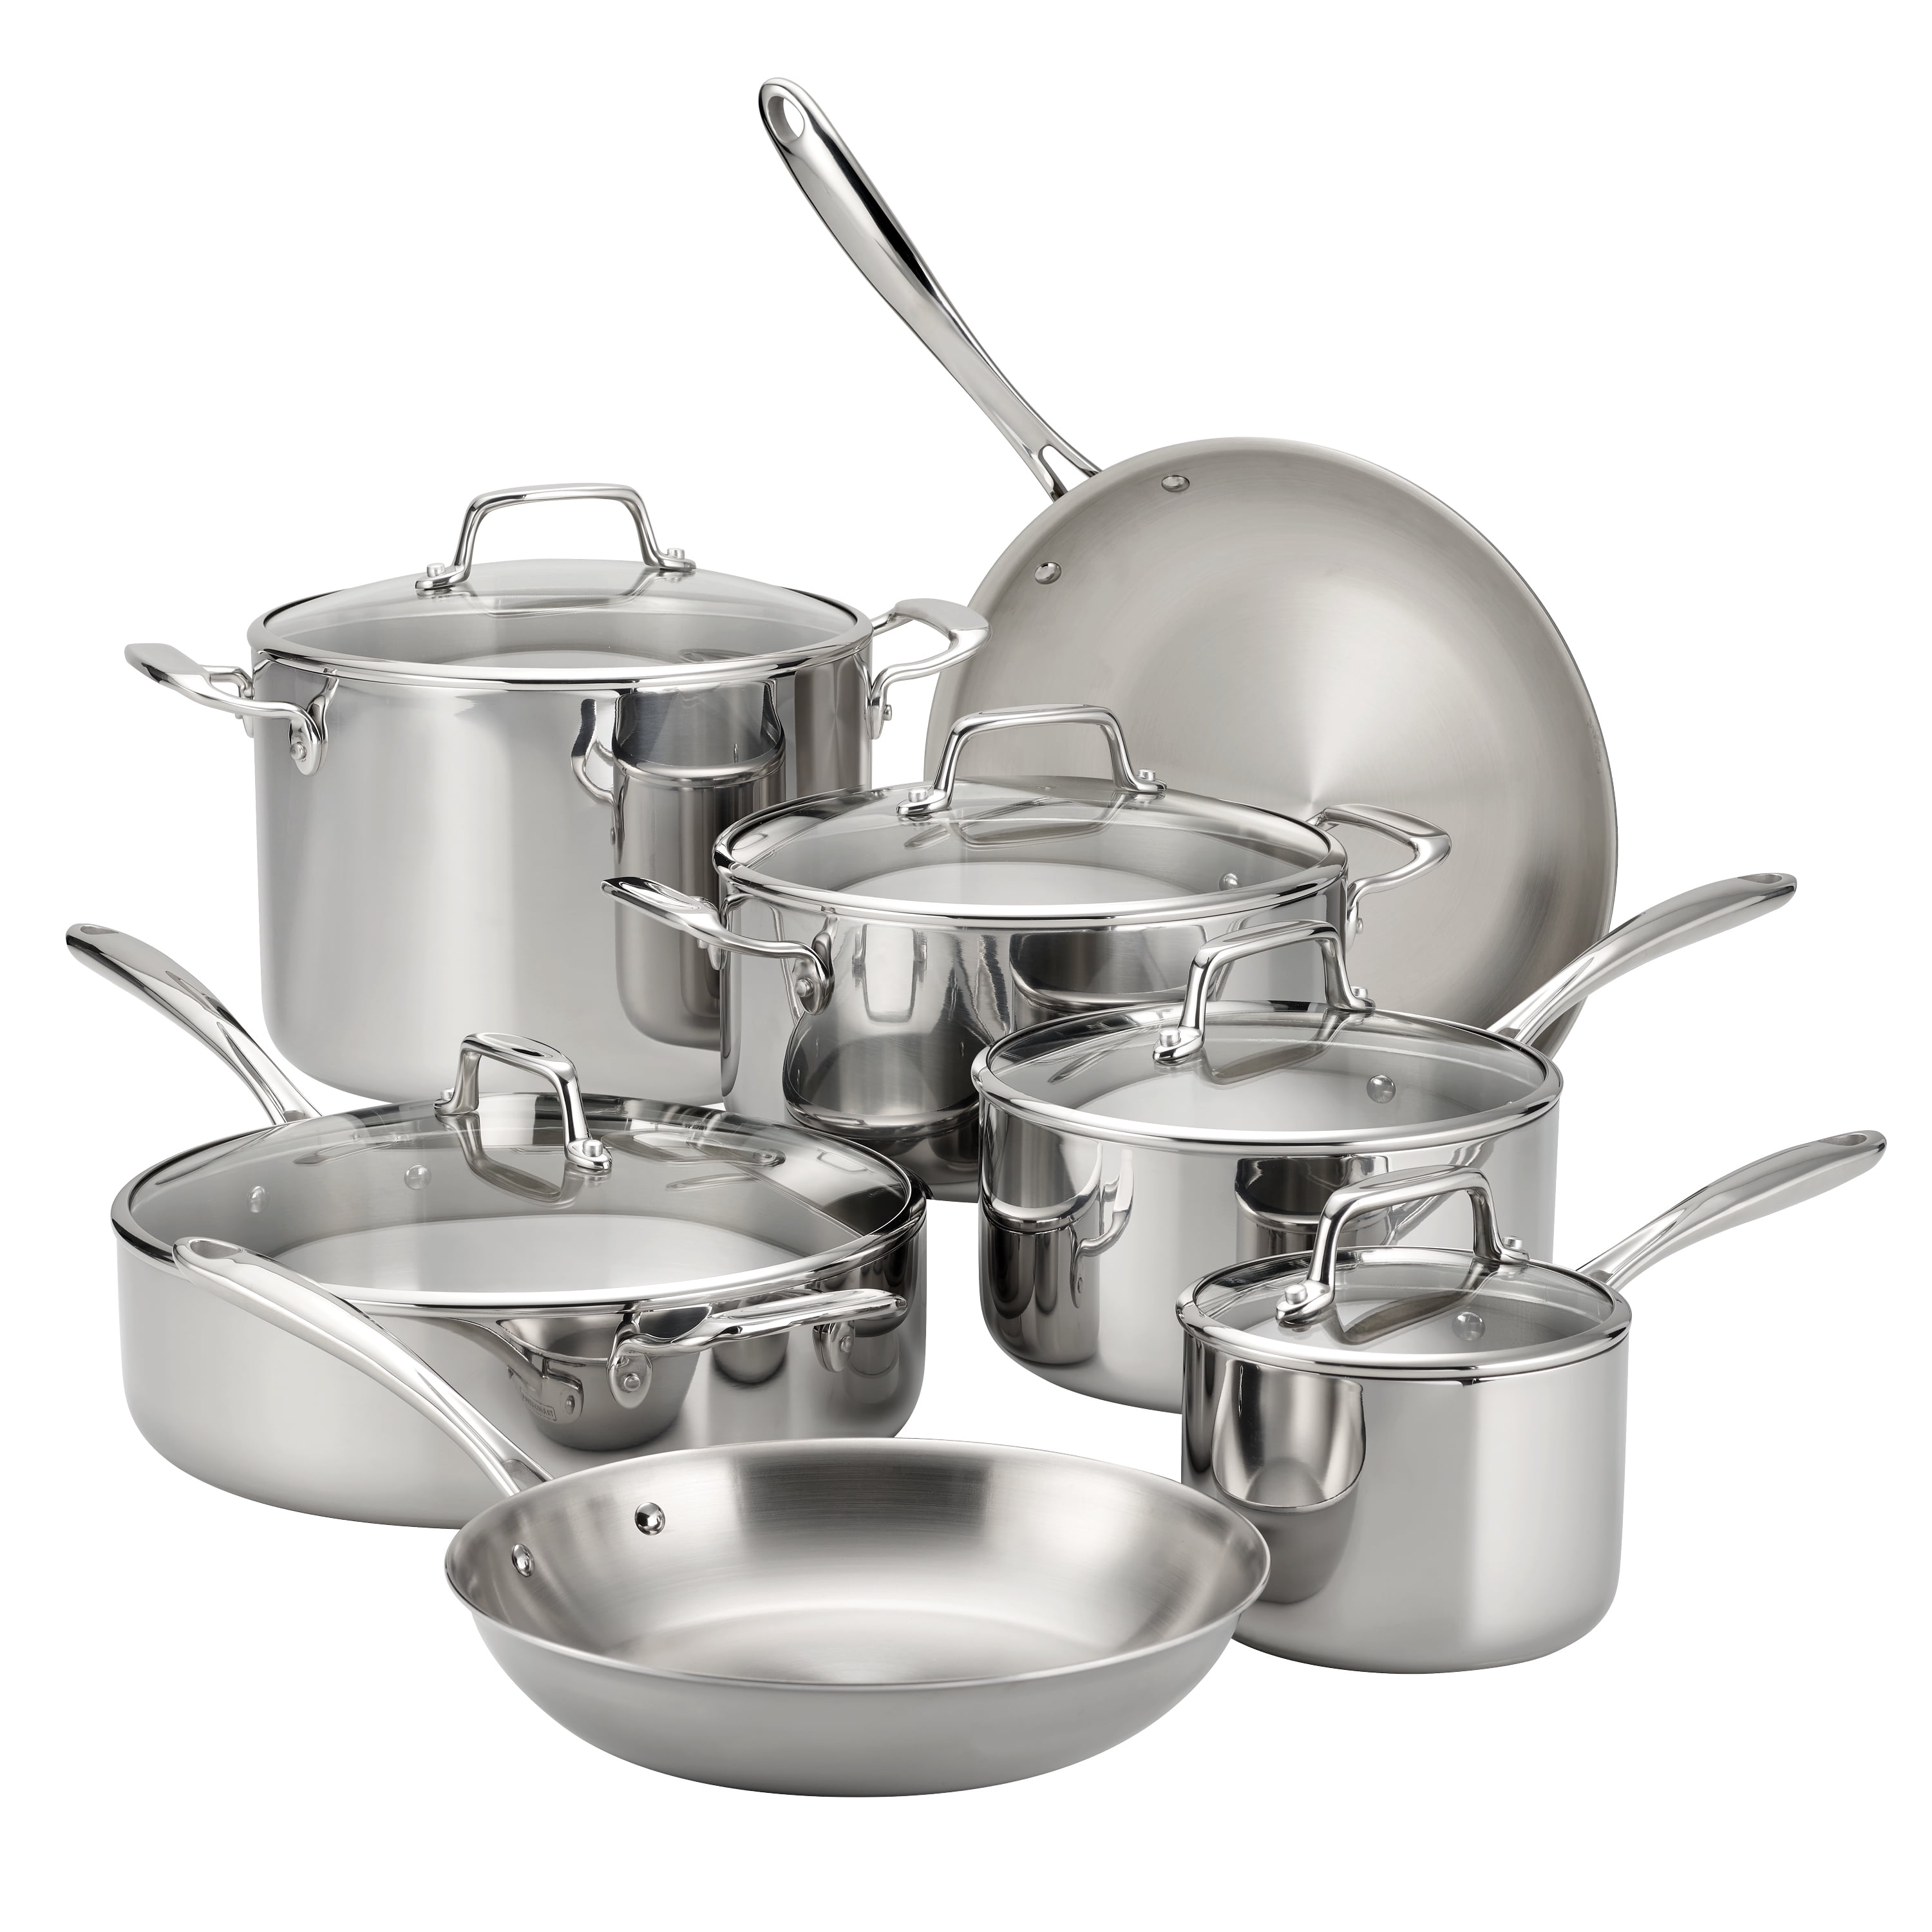 Tramontina 12-Piece Tri-Ply Clad Stainless Steel Cookware Set, with Tramontina 12 Piece Stainless Steel Cookware Set